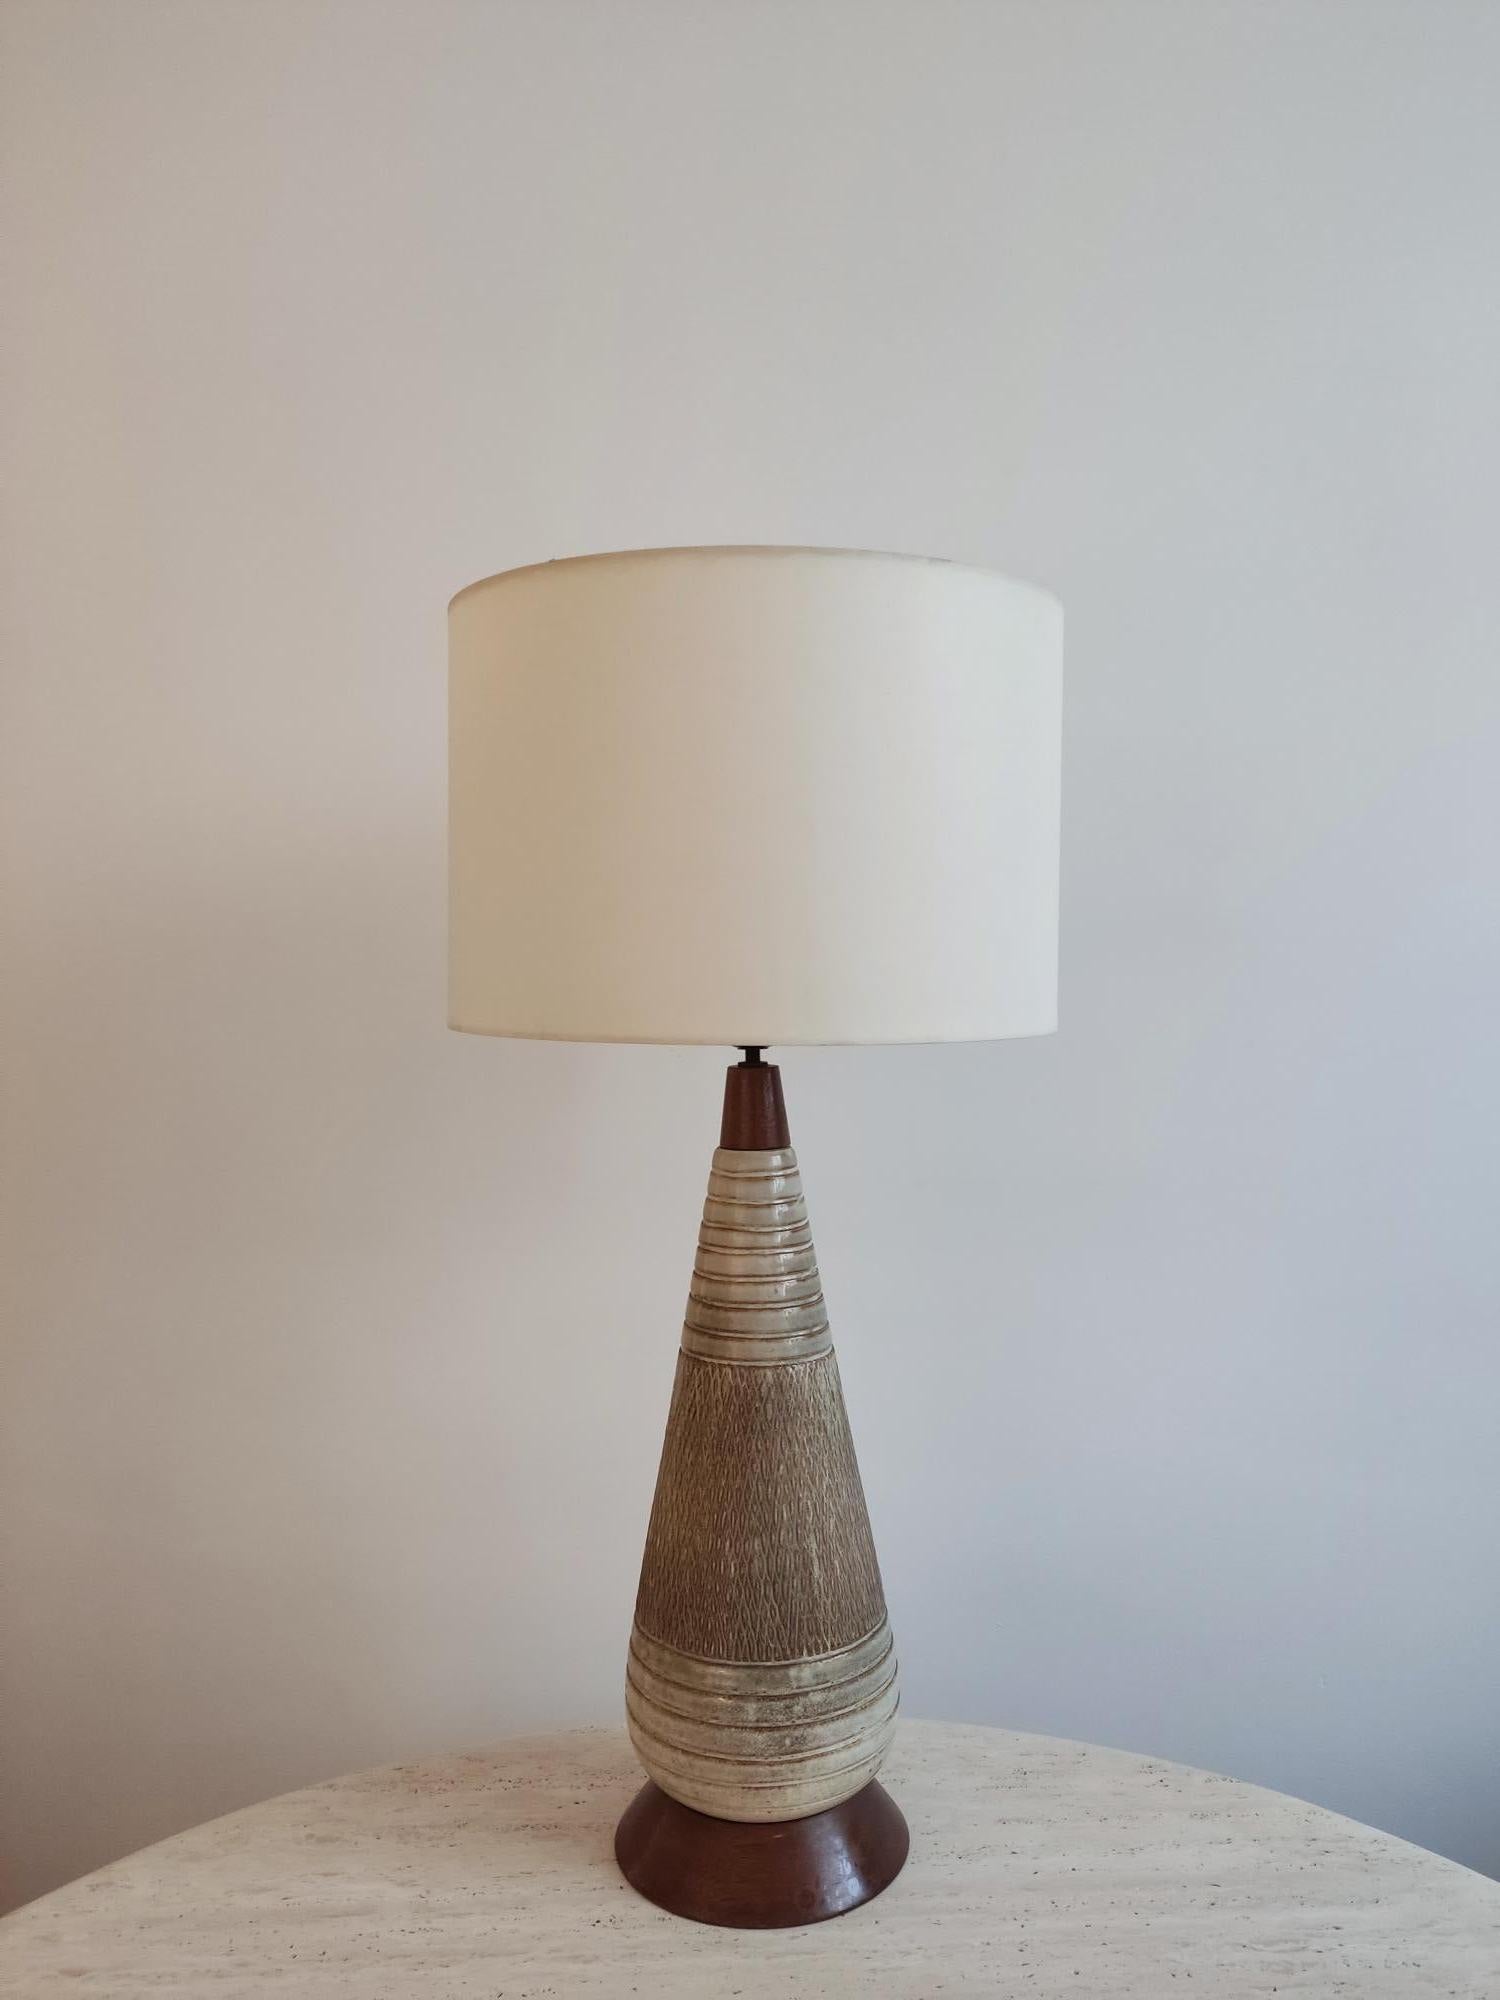 Large mid-century Danish ceramic and wood lamp. Lots of elegance and beautiful proportions for this tall lamp. The sober colors will adapt to all interiors.